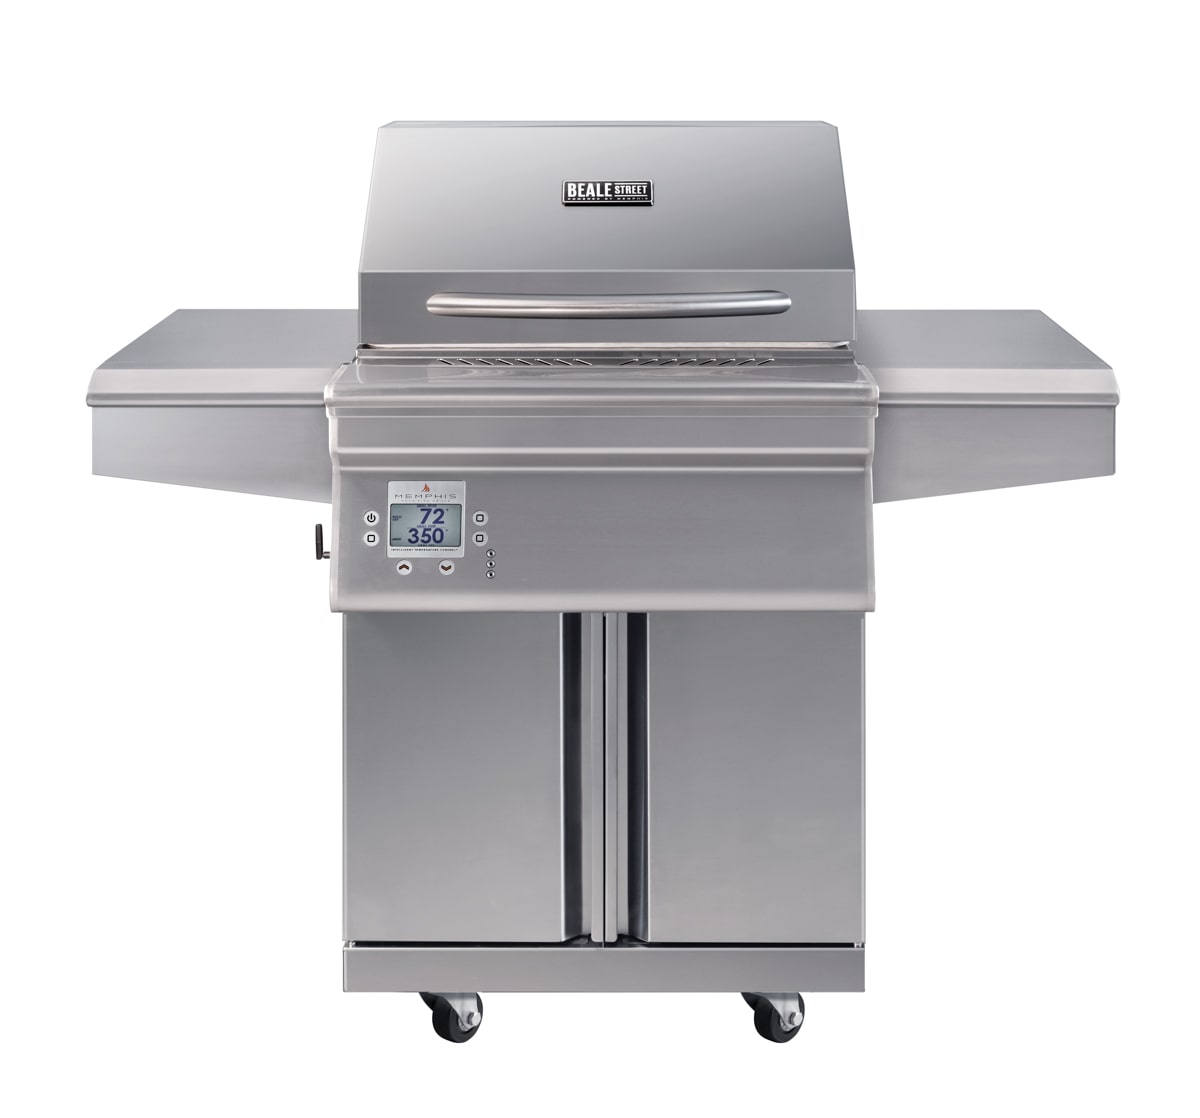 Beale Street standalone grill from Memphis Grills